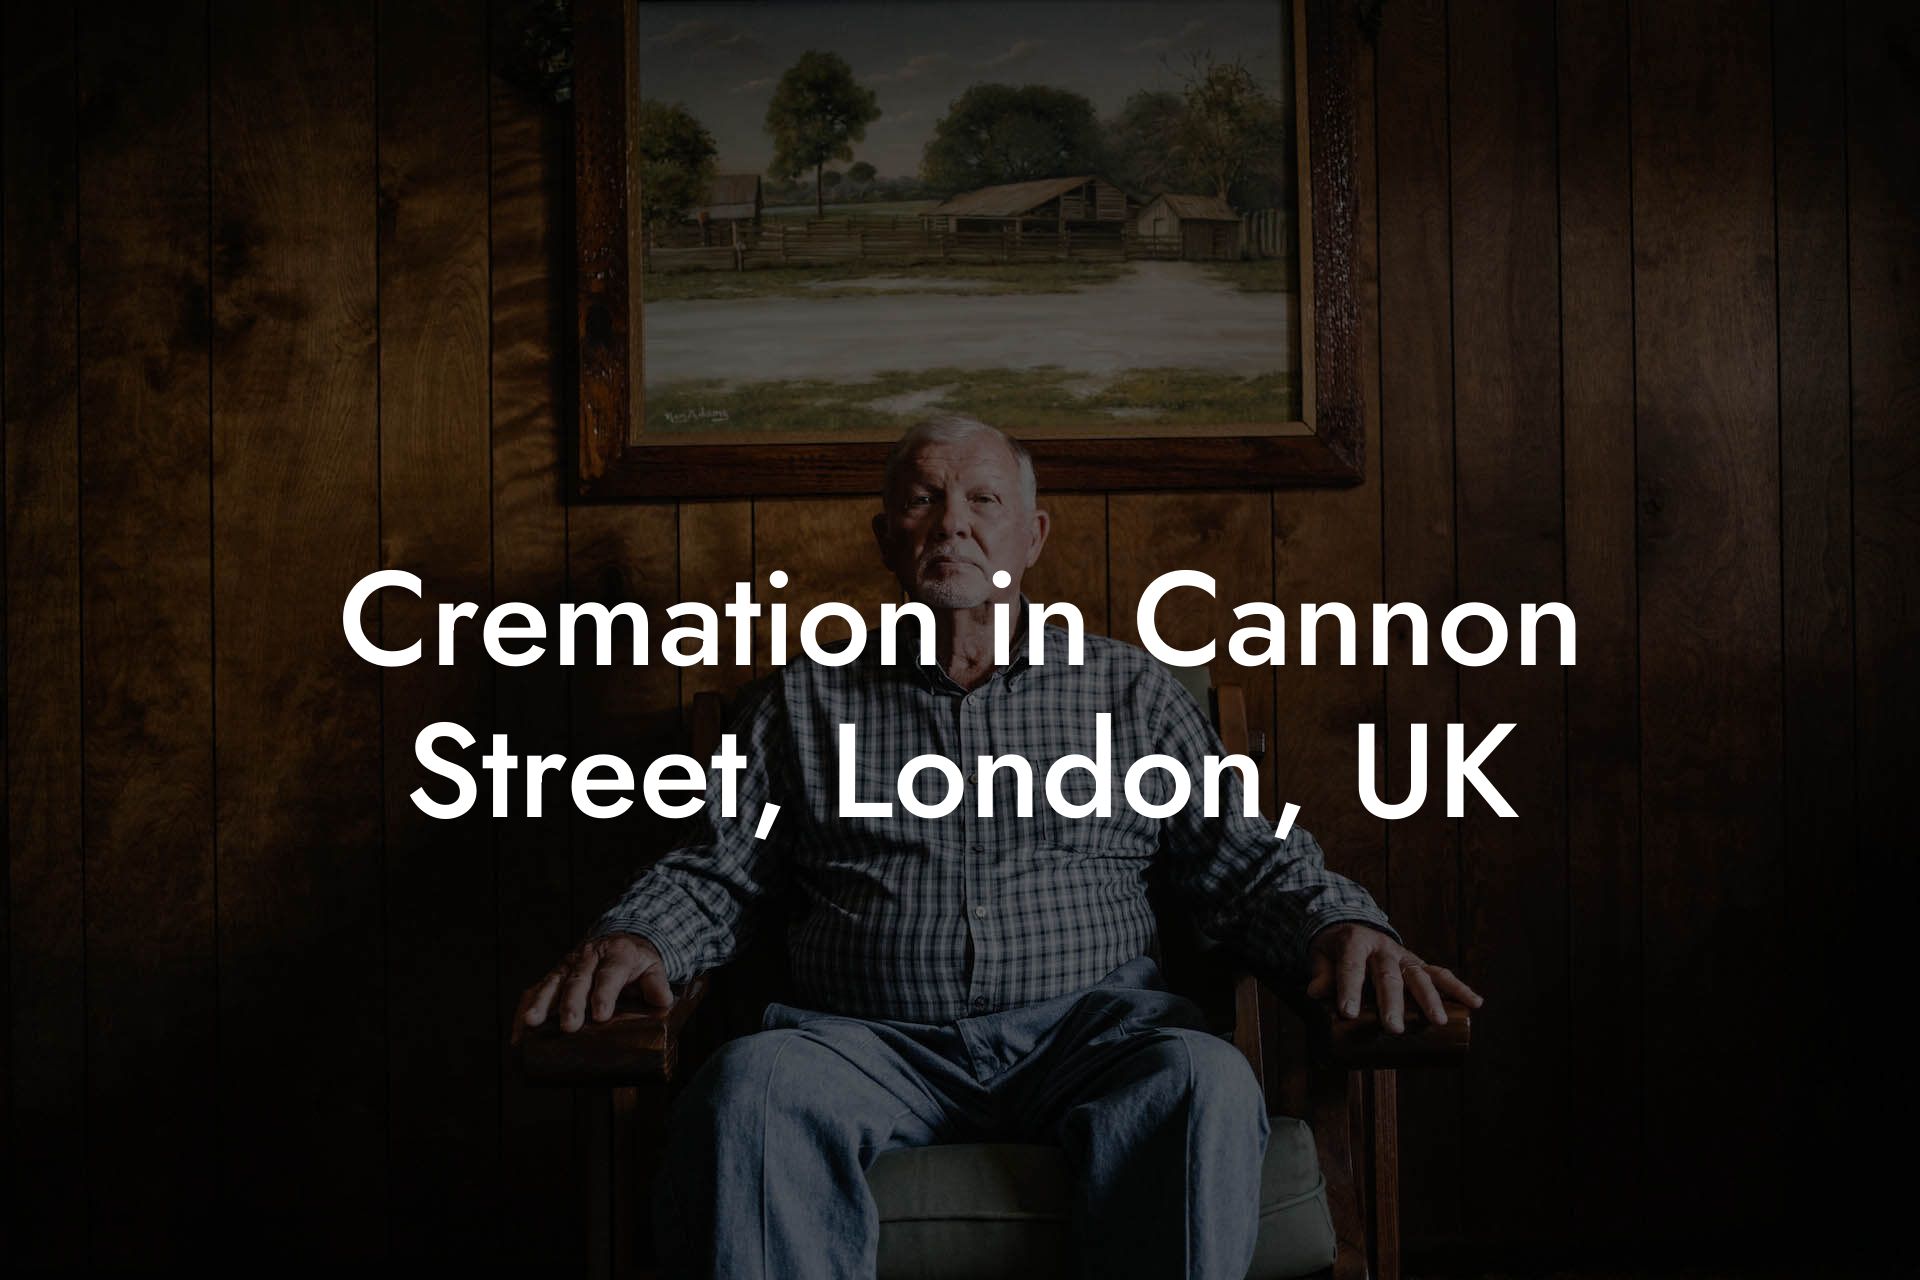 Cremation in Cannon Street, London, UK